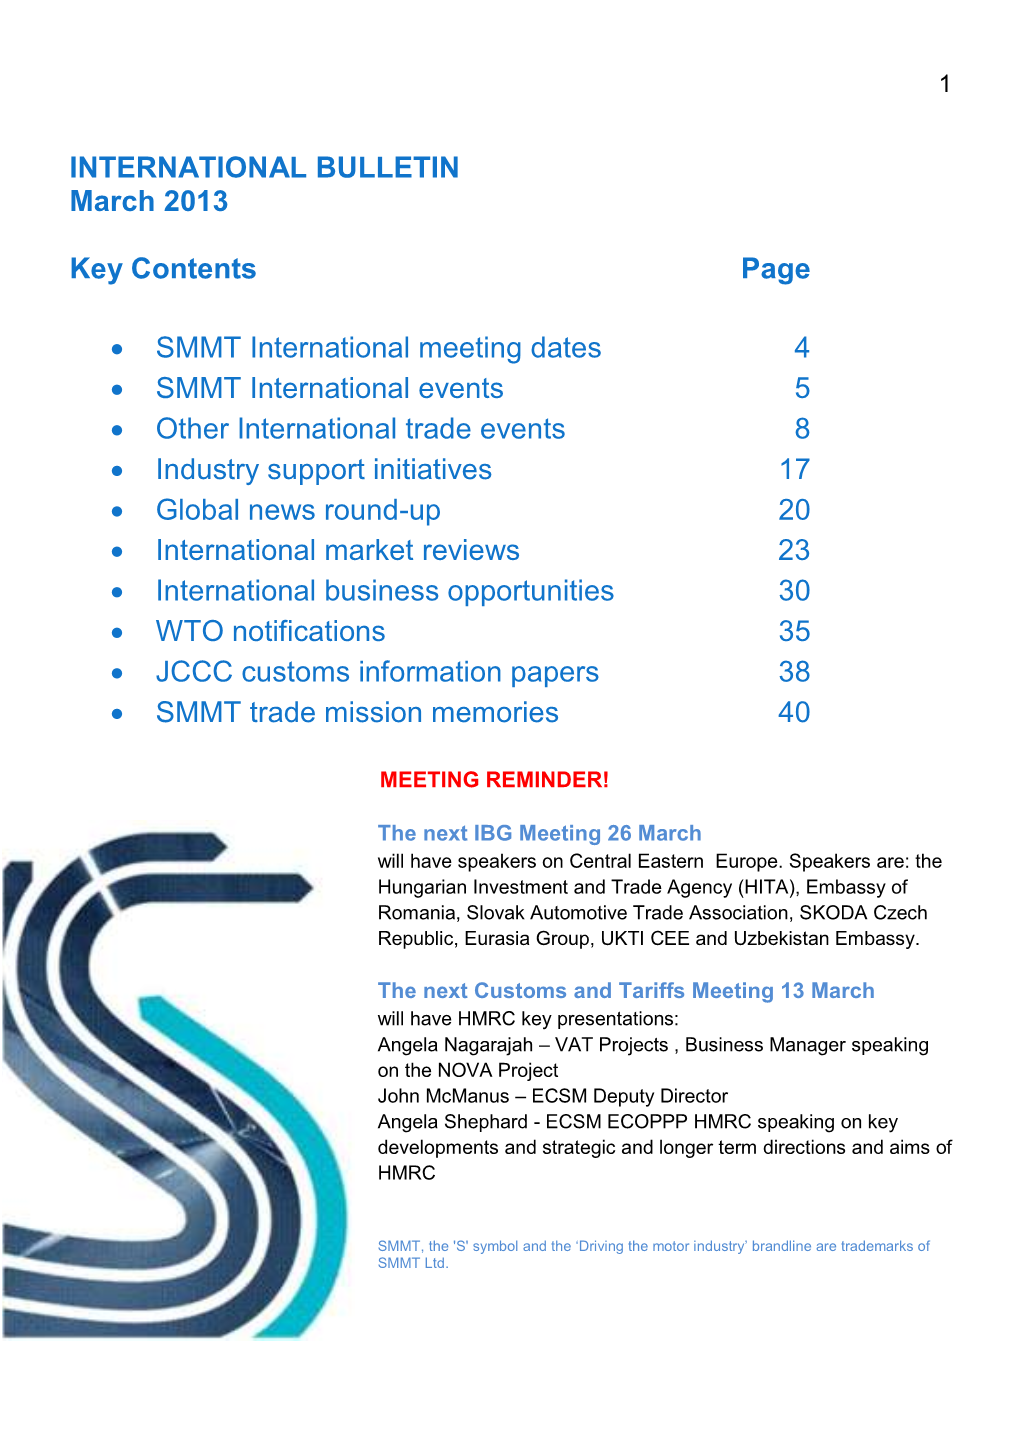 INTERNATIONAL BULLETIN March 2013 Key Contents Page • SMMT International Meeting Dates 4 • SMMT International Events 5